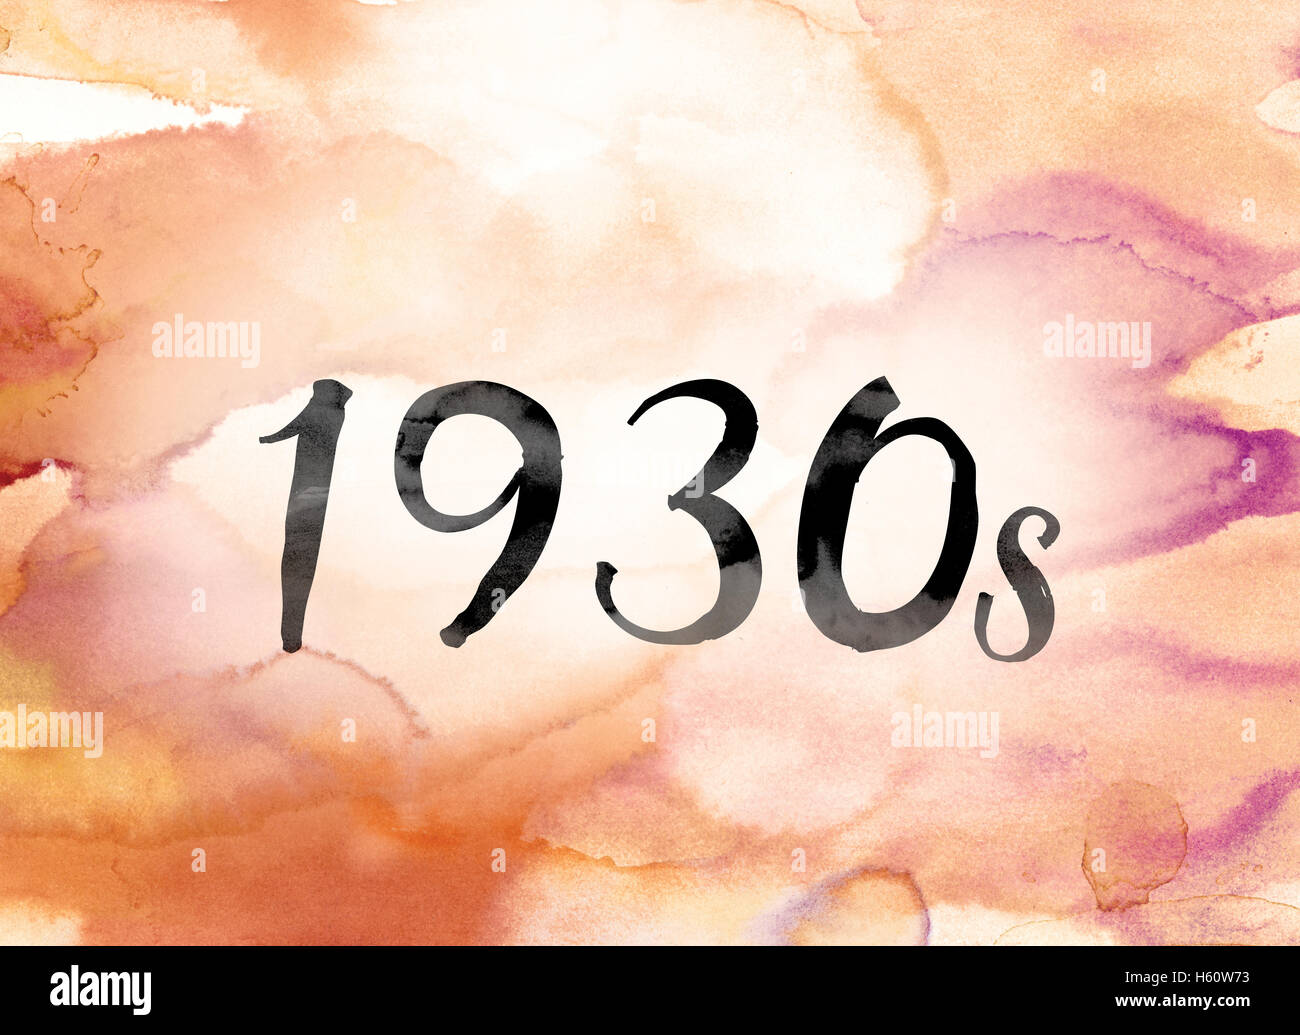 The word '1930s' painted in black ink over a colorful watercolor washed background concept and theme. Stock Photo